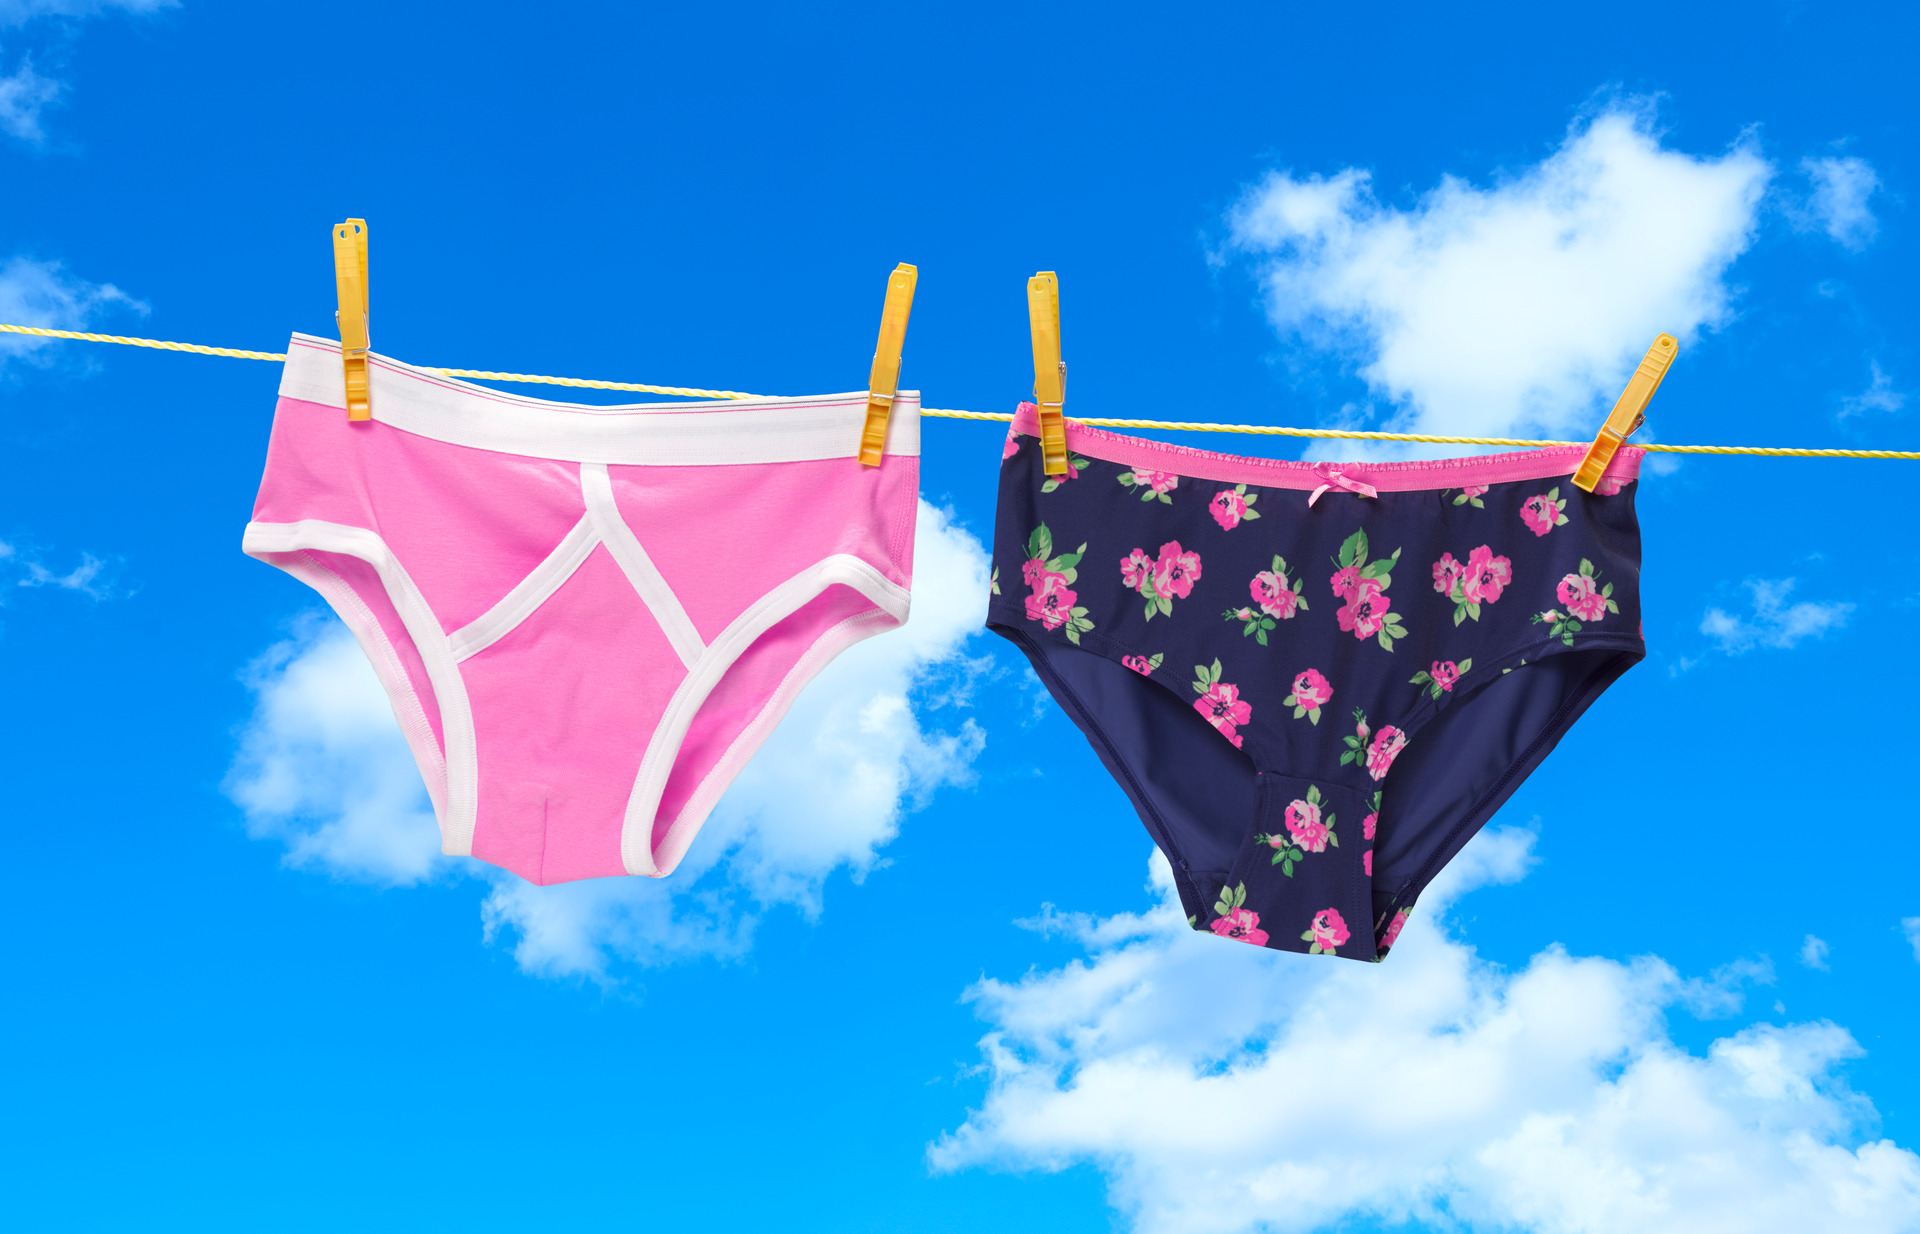 MYER - It's National Underwear Day and yep, that means we're officially  doing everything in our undies! If the top drawer's in need of a refresh  shop up to 20% off women's